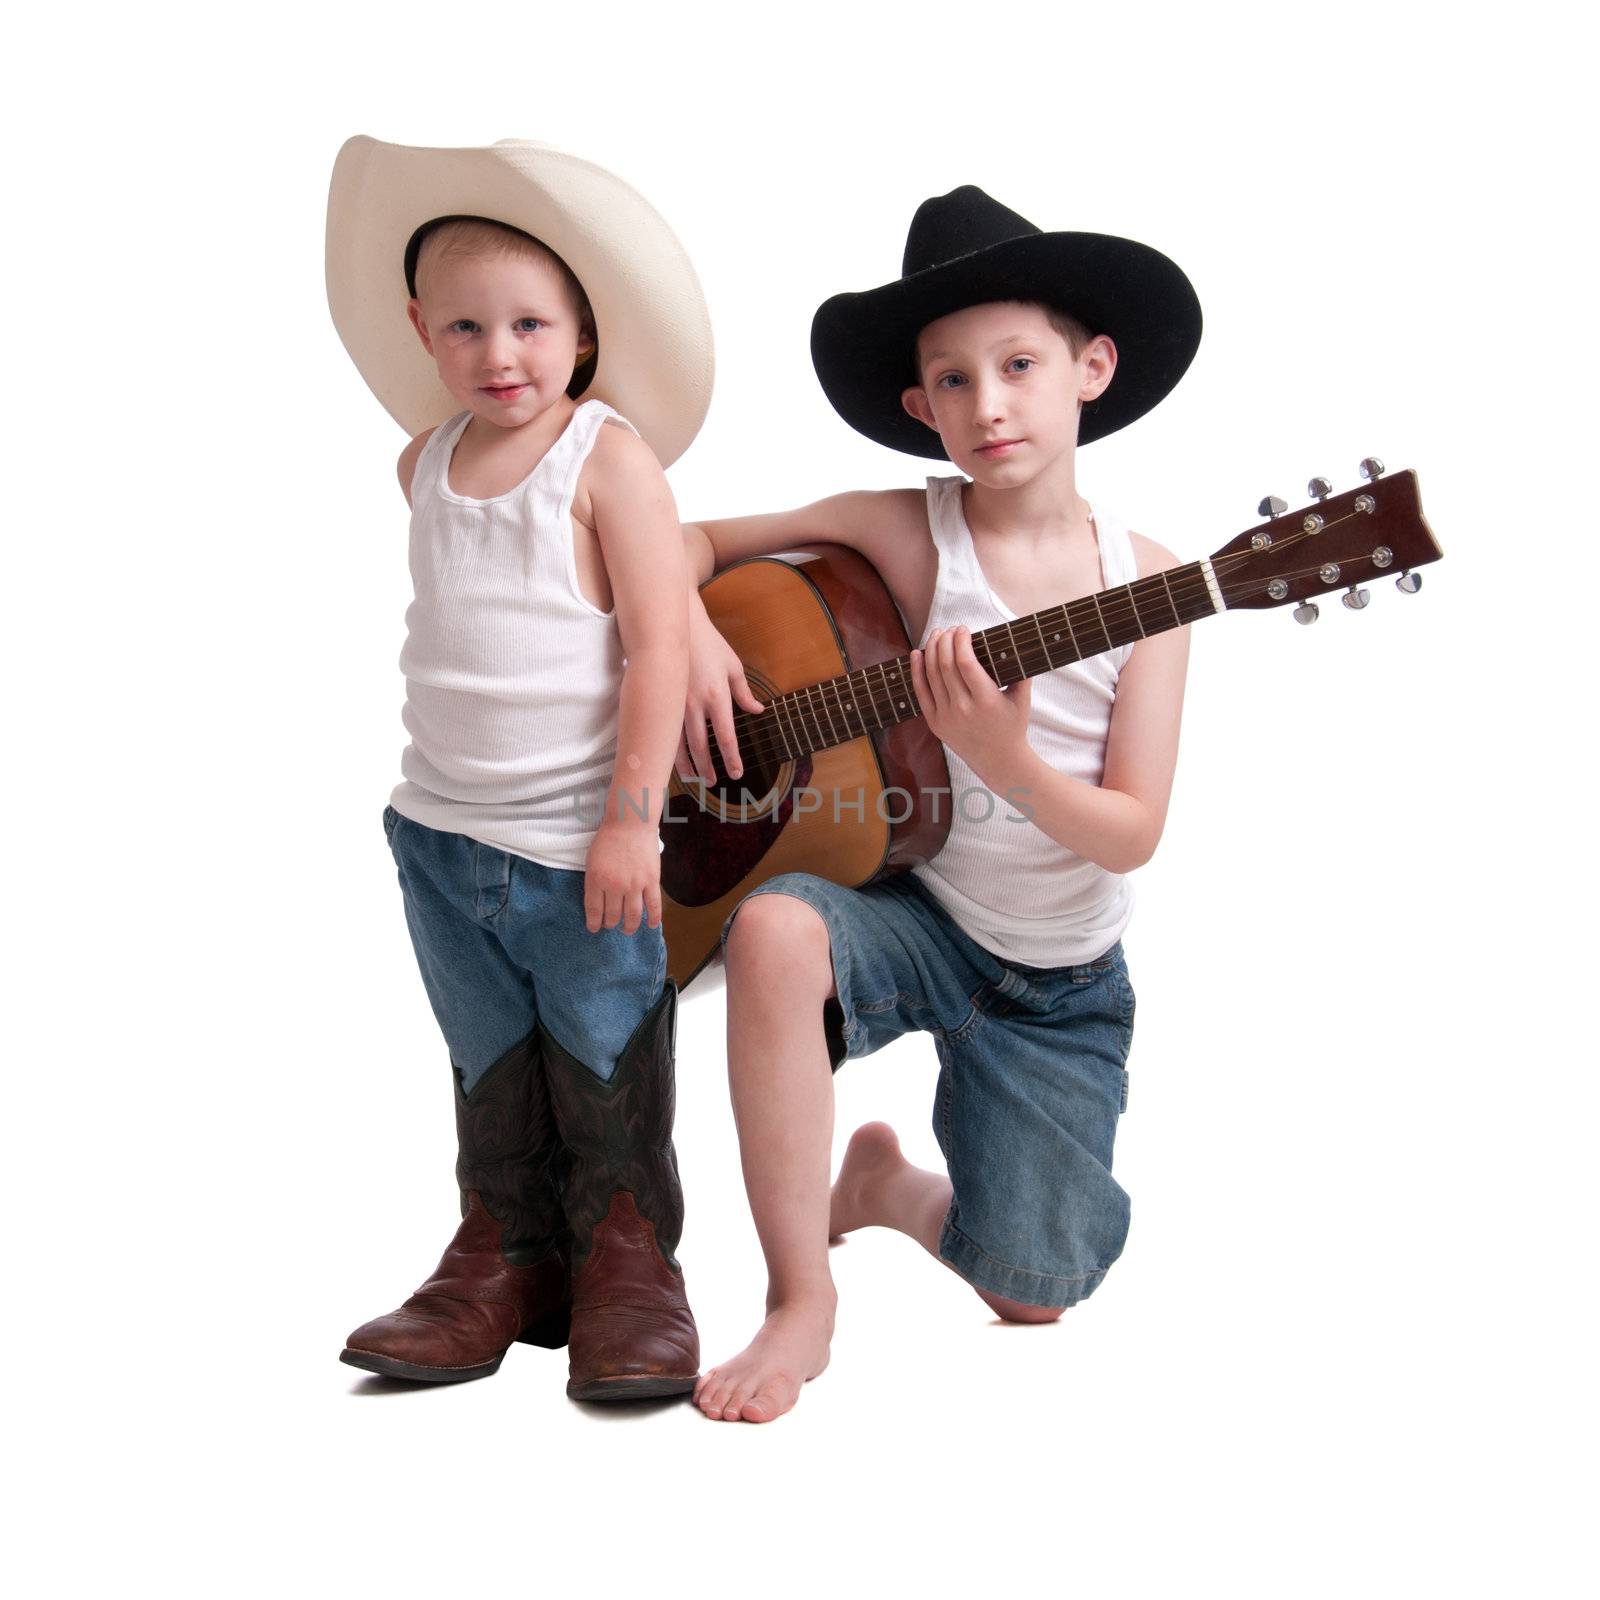 Two young brothers in cowboy hats and guitar